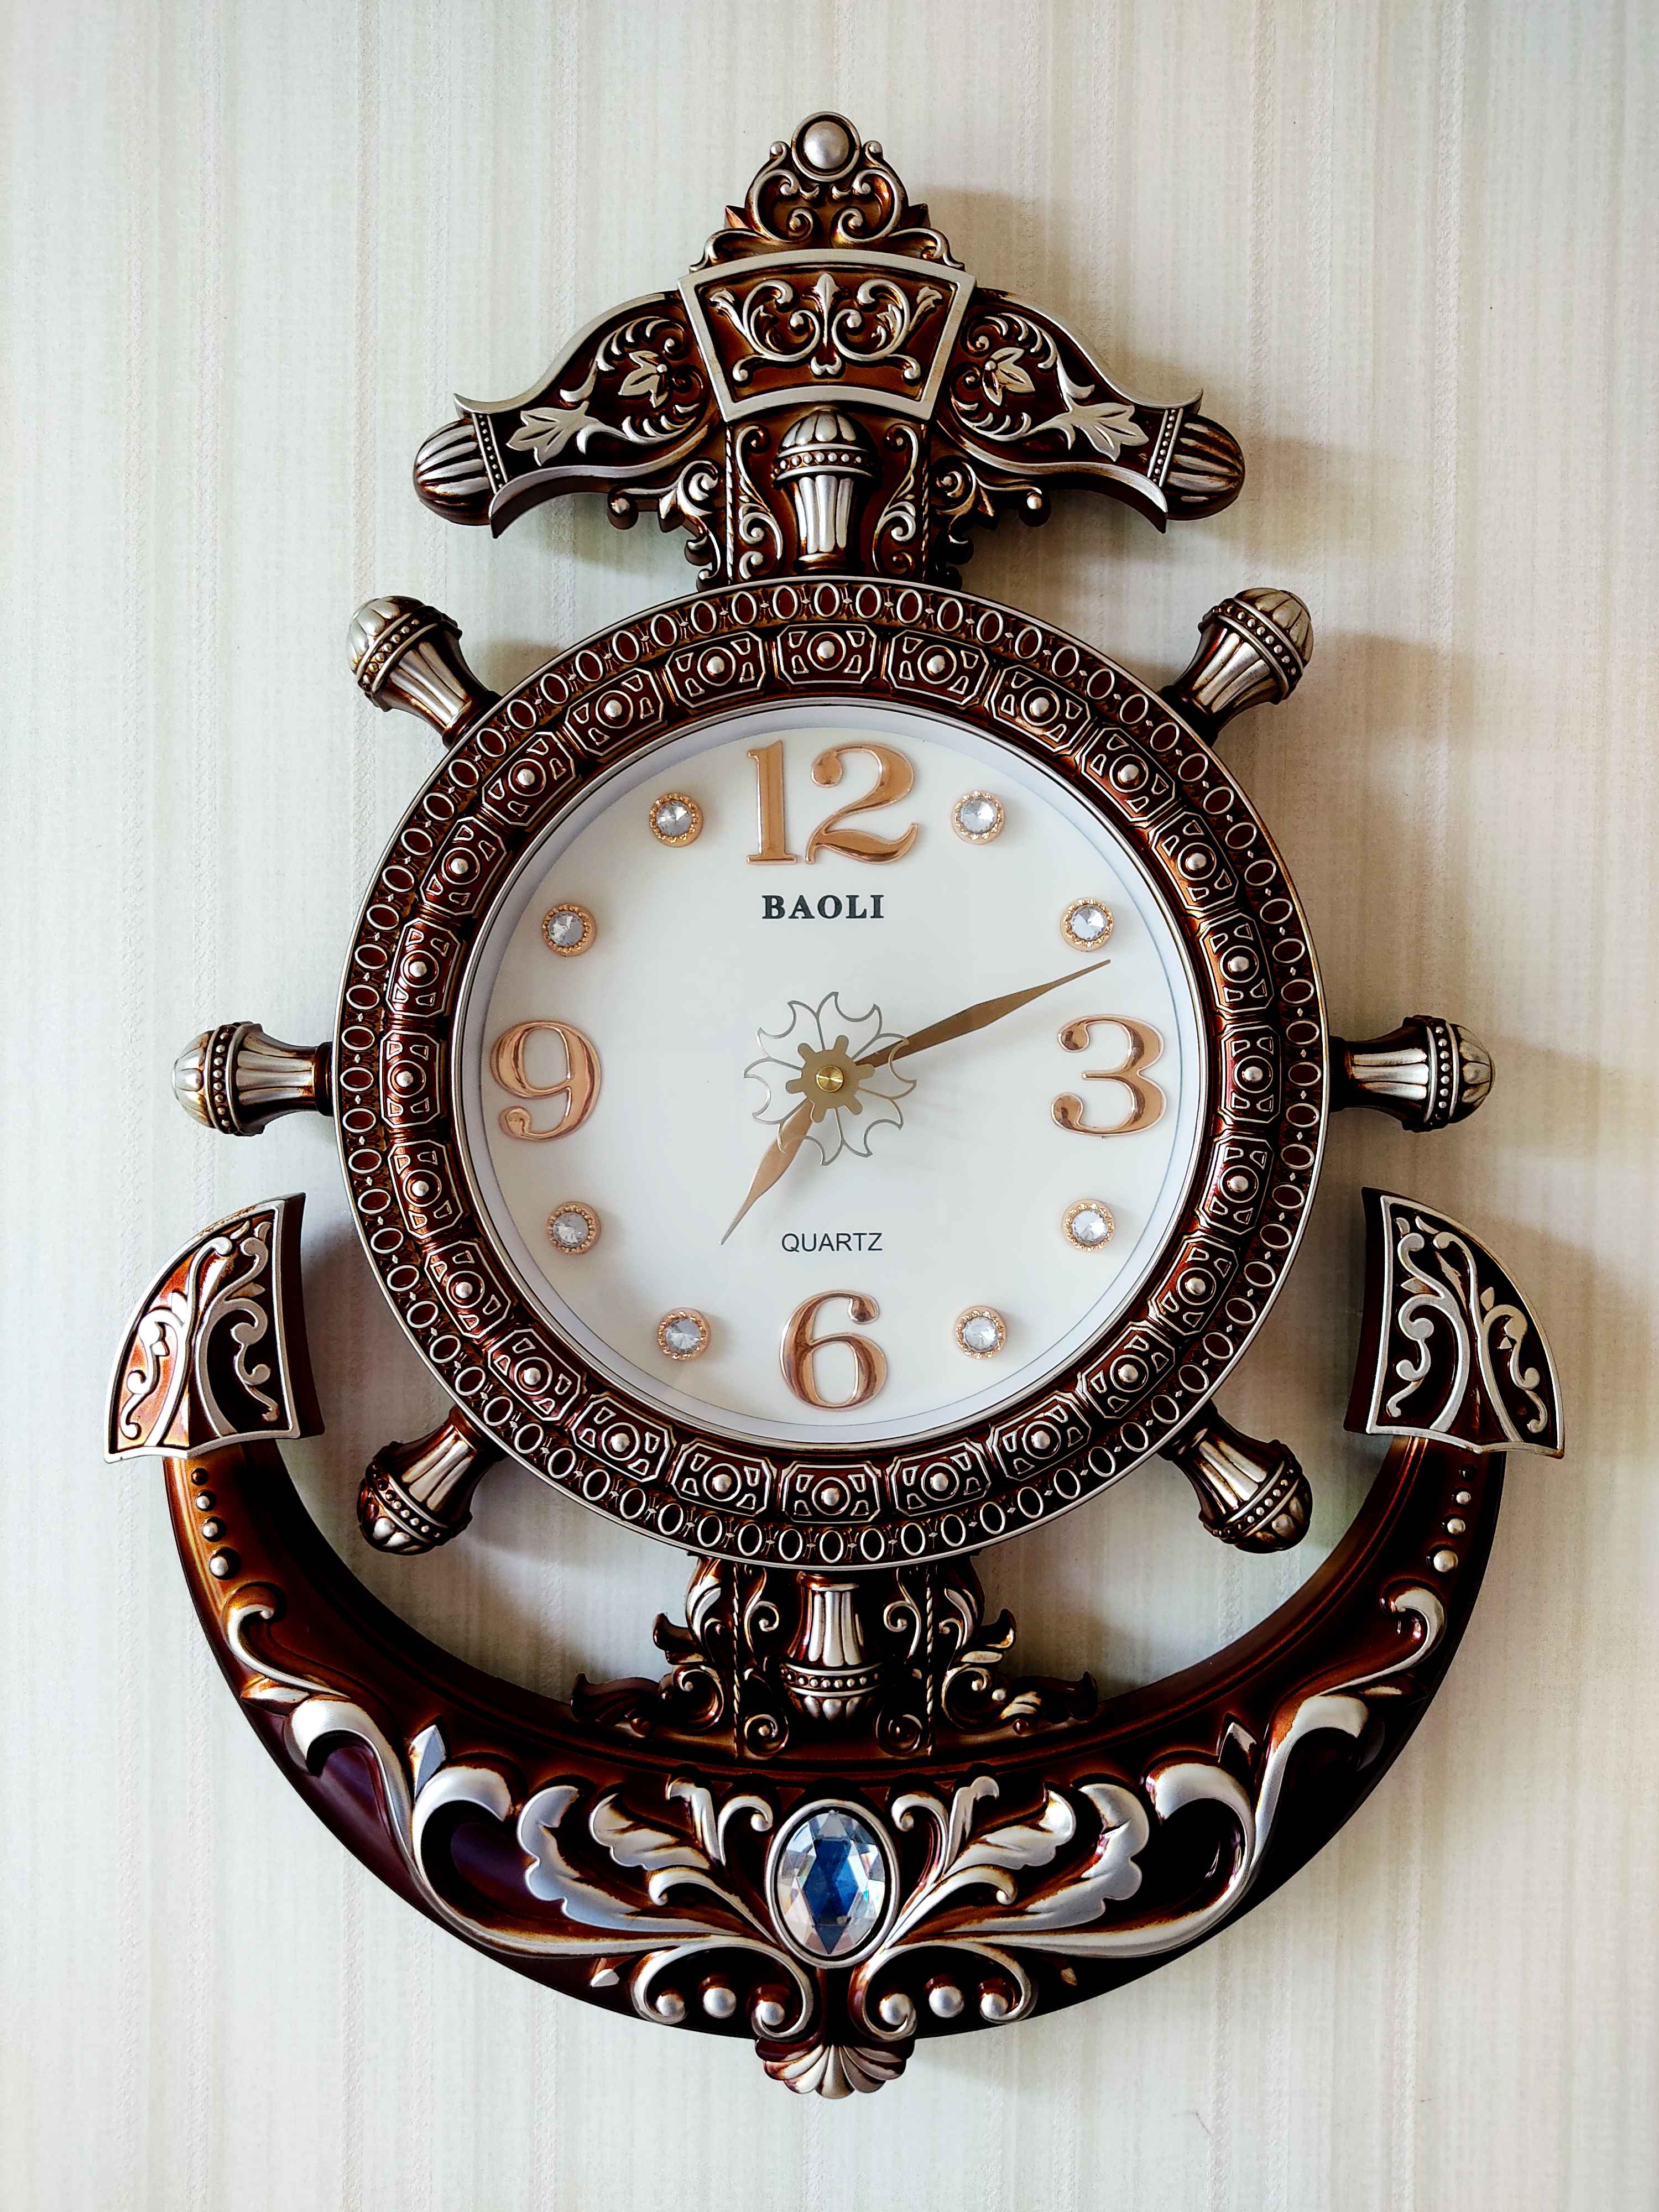 FunkyTradition Diamond Studded Anchor Brown Color Wall Clock for Home Office Decor and Gifts 57 CM Tall